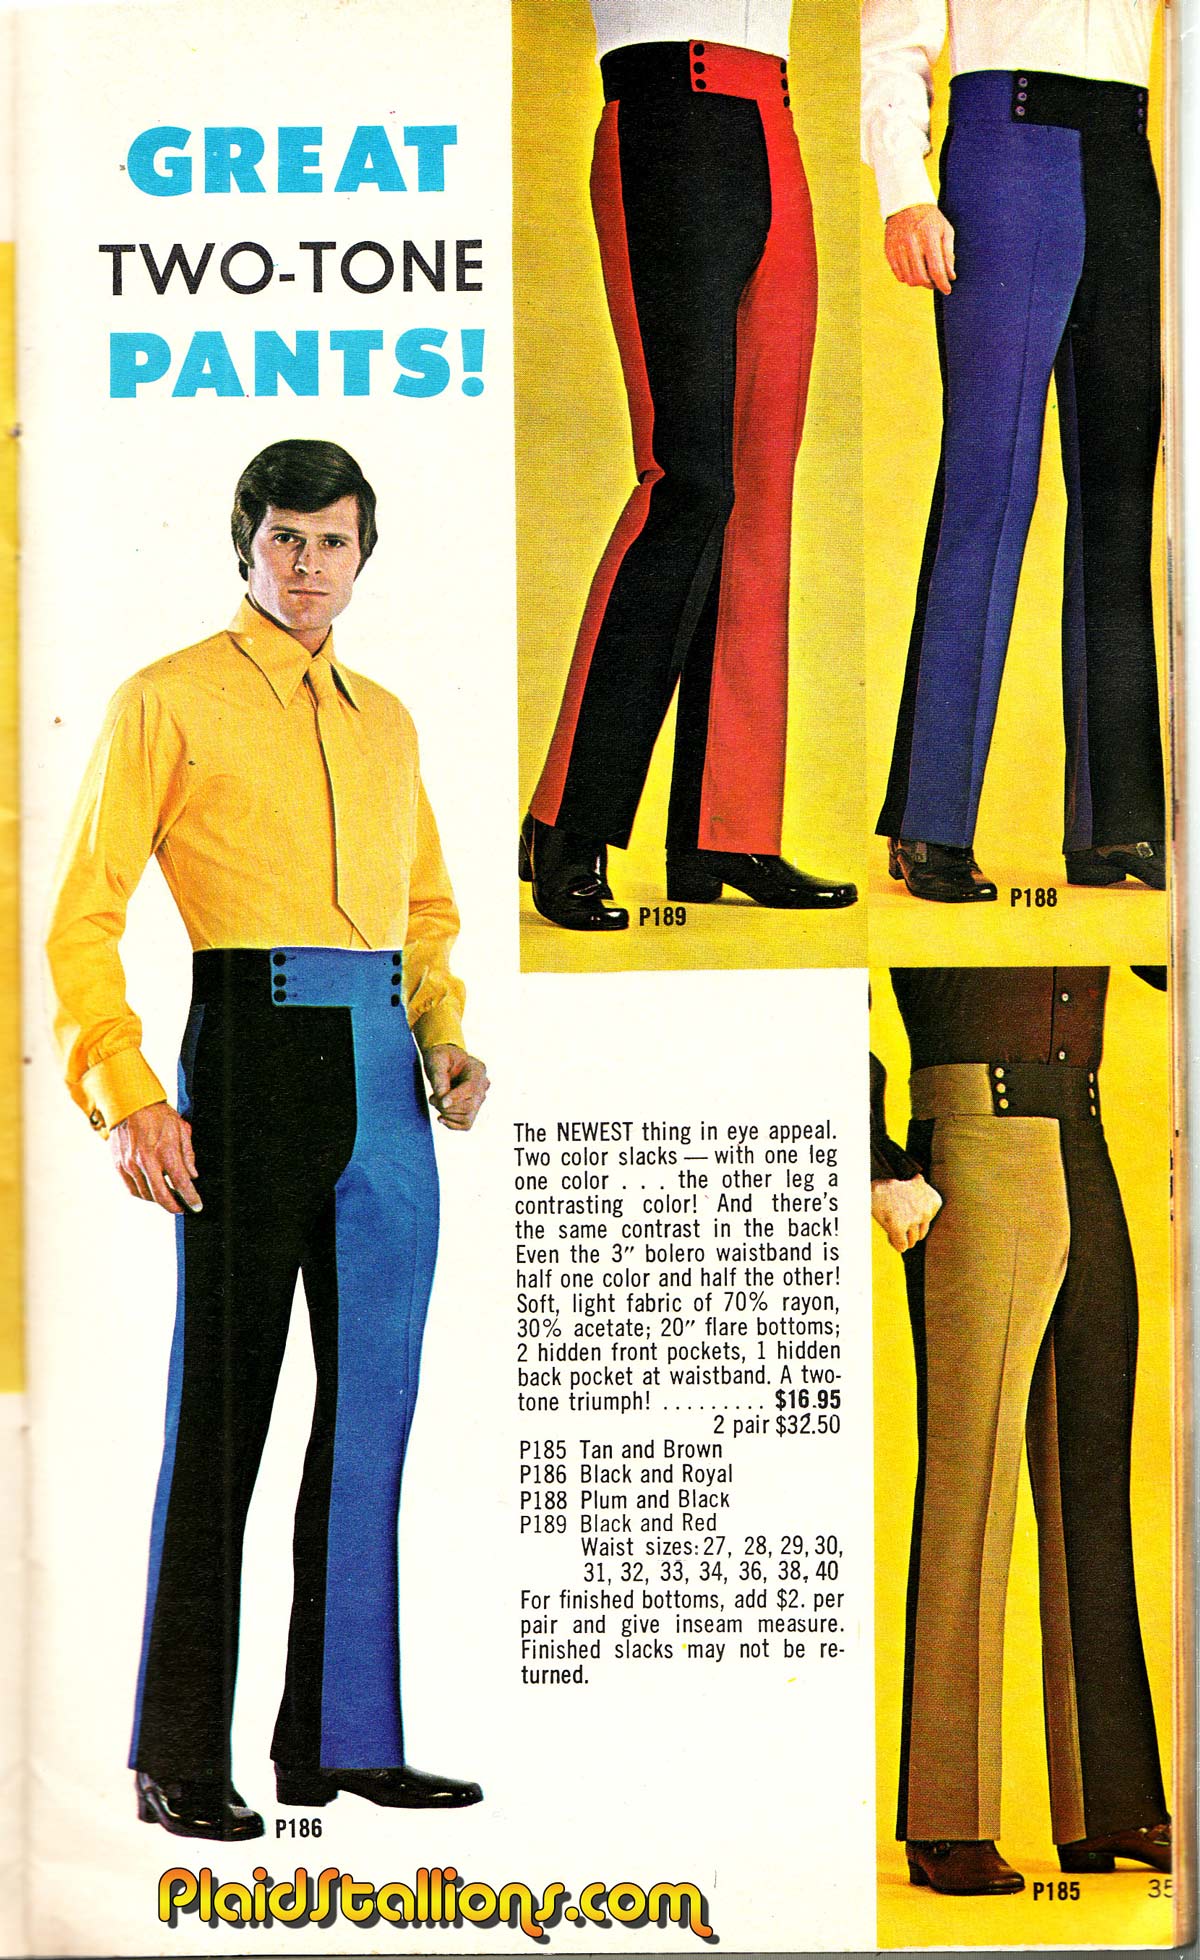 Great Two Tone Pants! - PS